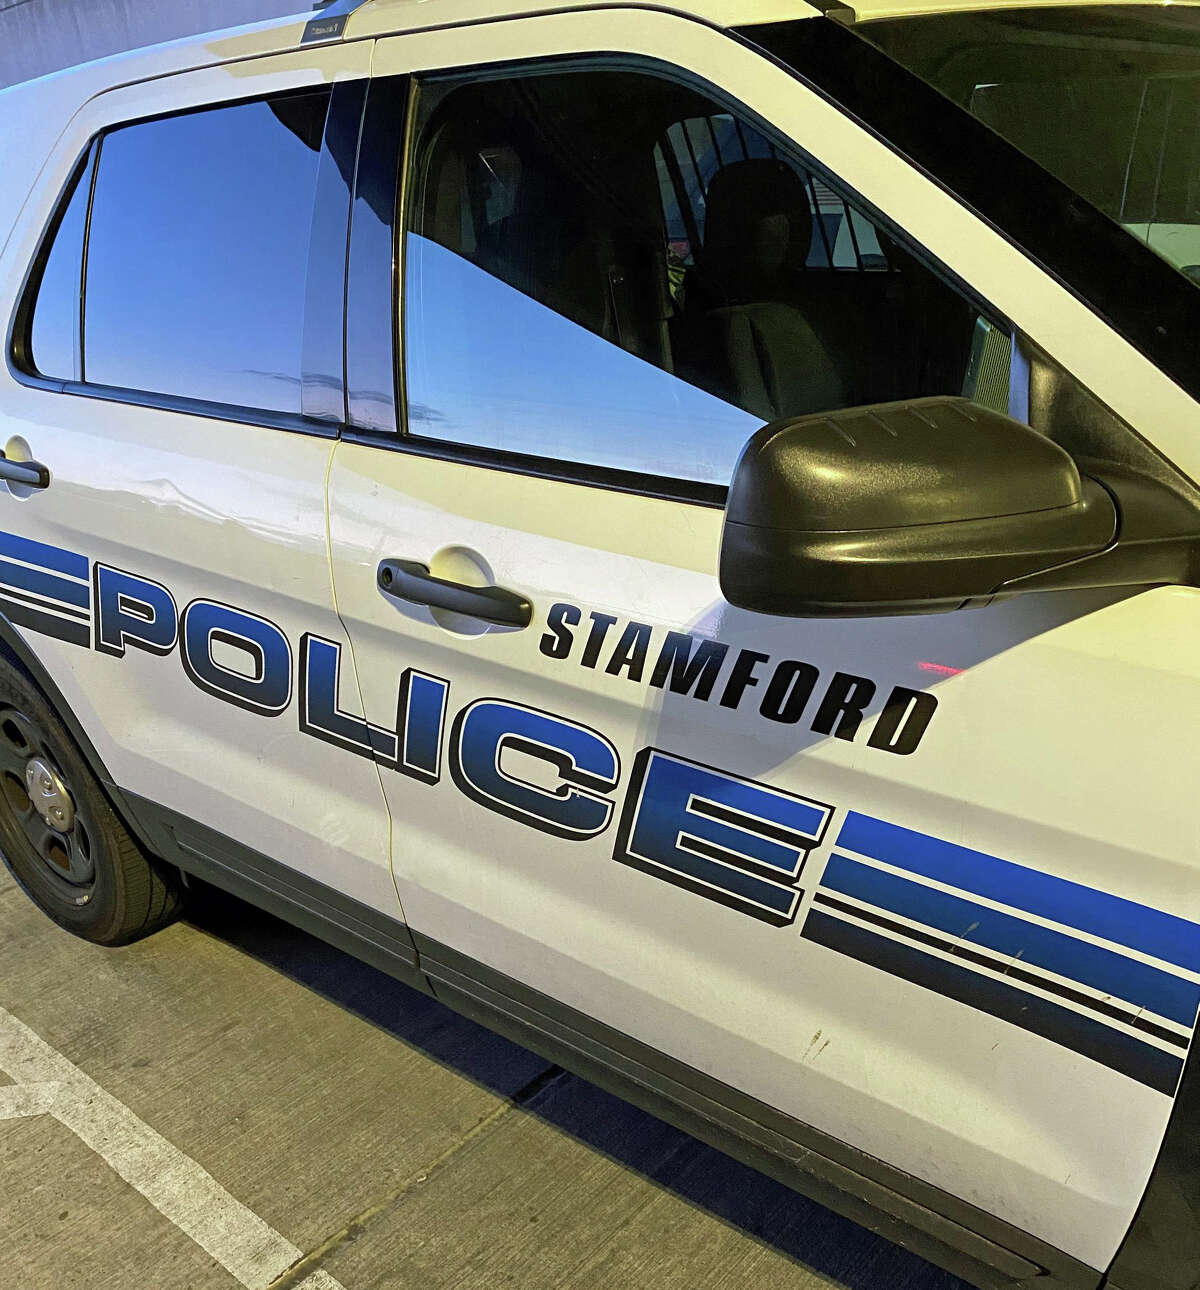 A 14-year-old local boy was behind the shooting that wounded a 32-year-old man in the leg on Monday night, according to Stamford police.